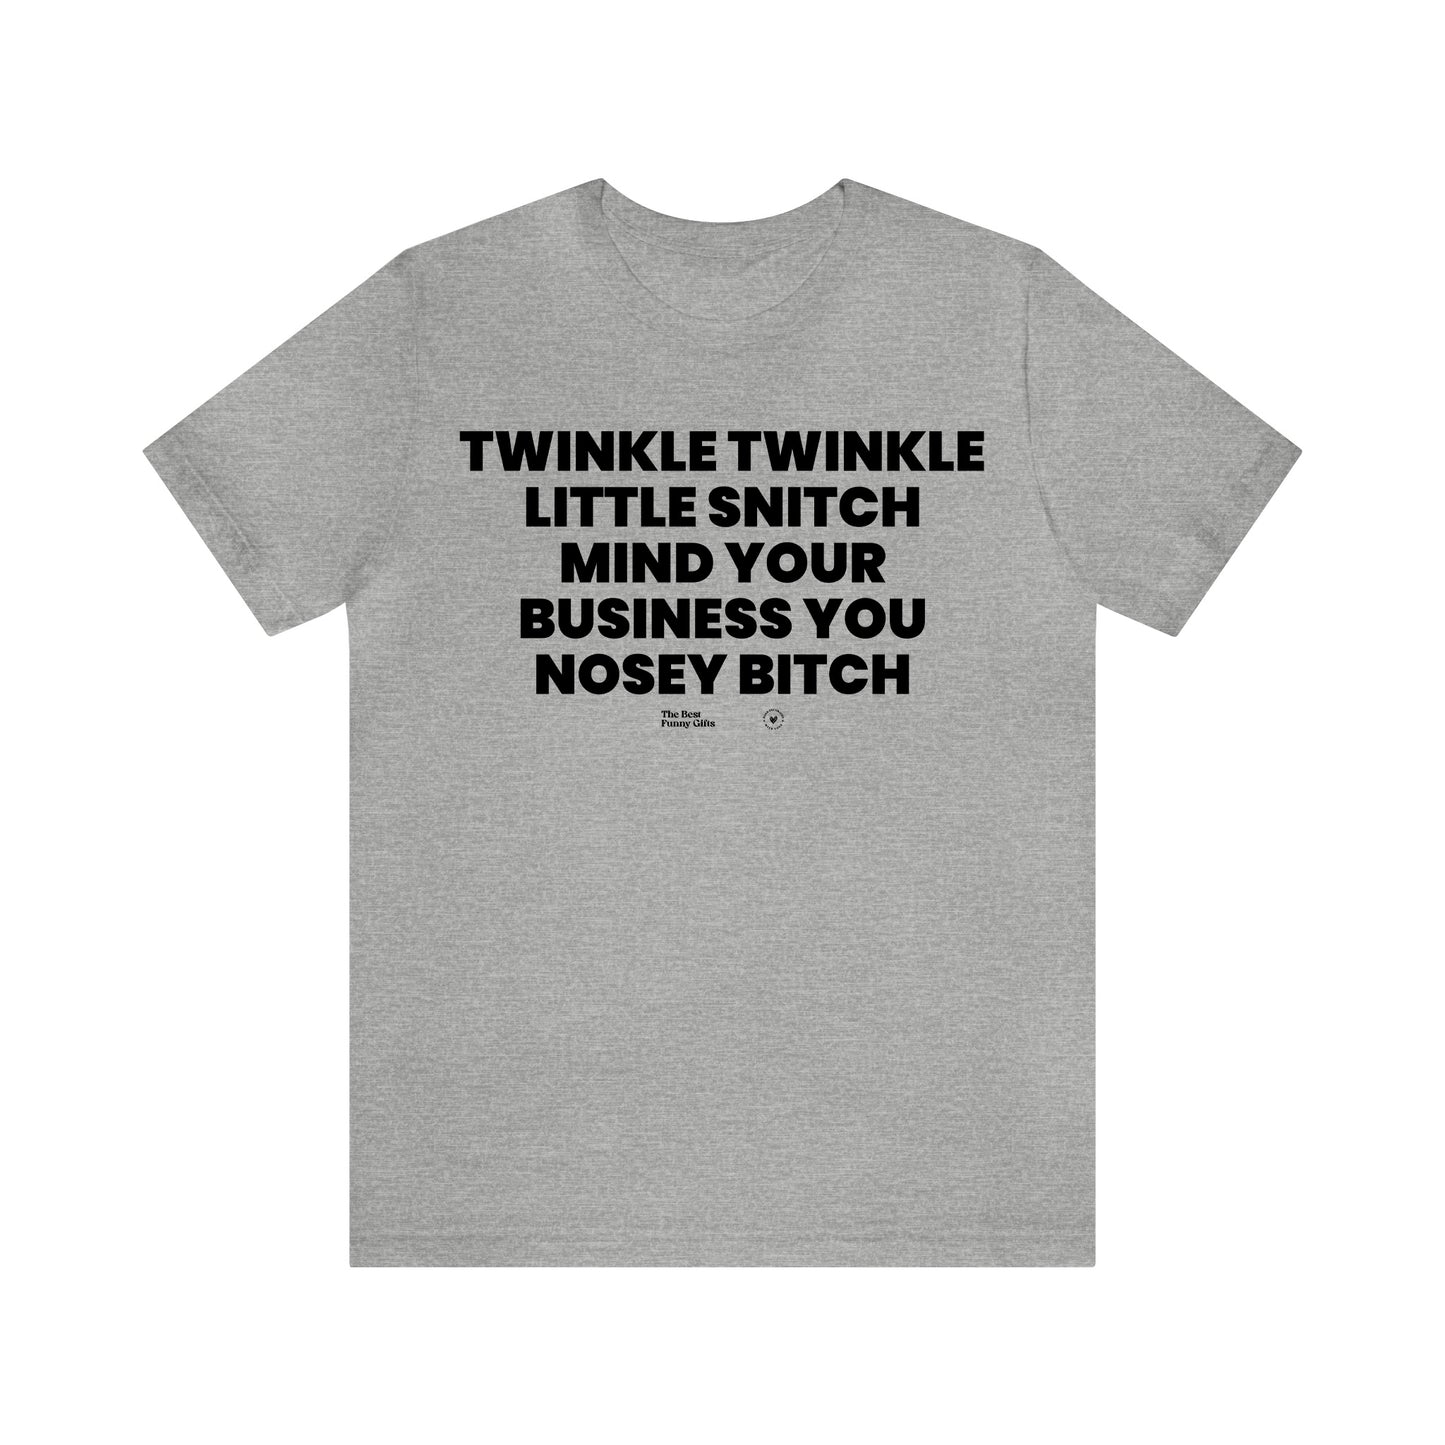 Mens T Shirts - Twinkle Twinkle Little Snitch Mind Your Business You Nosey Bitch - Funny Men T Shirts